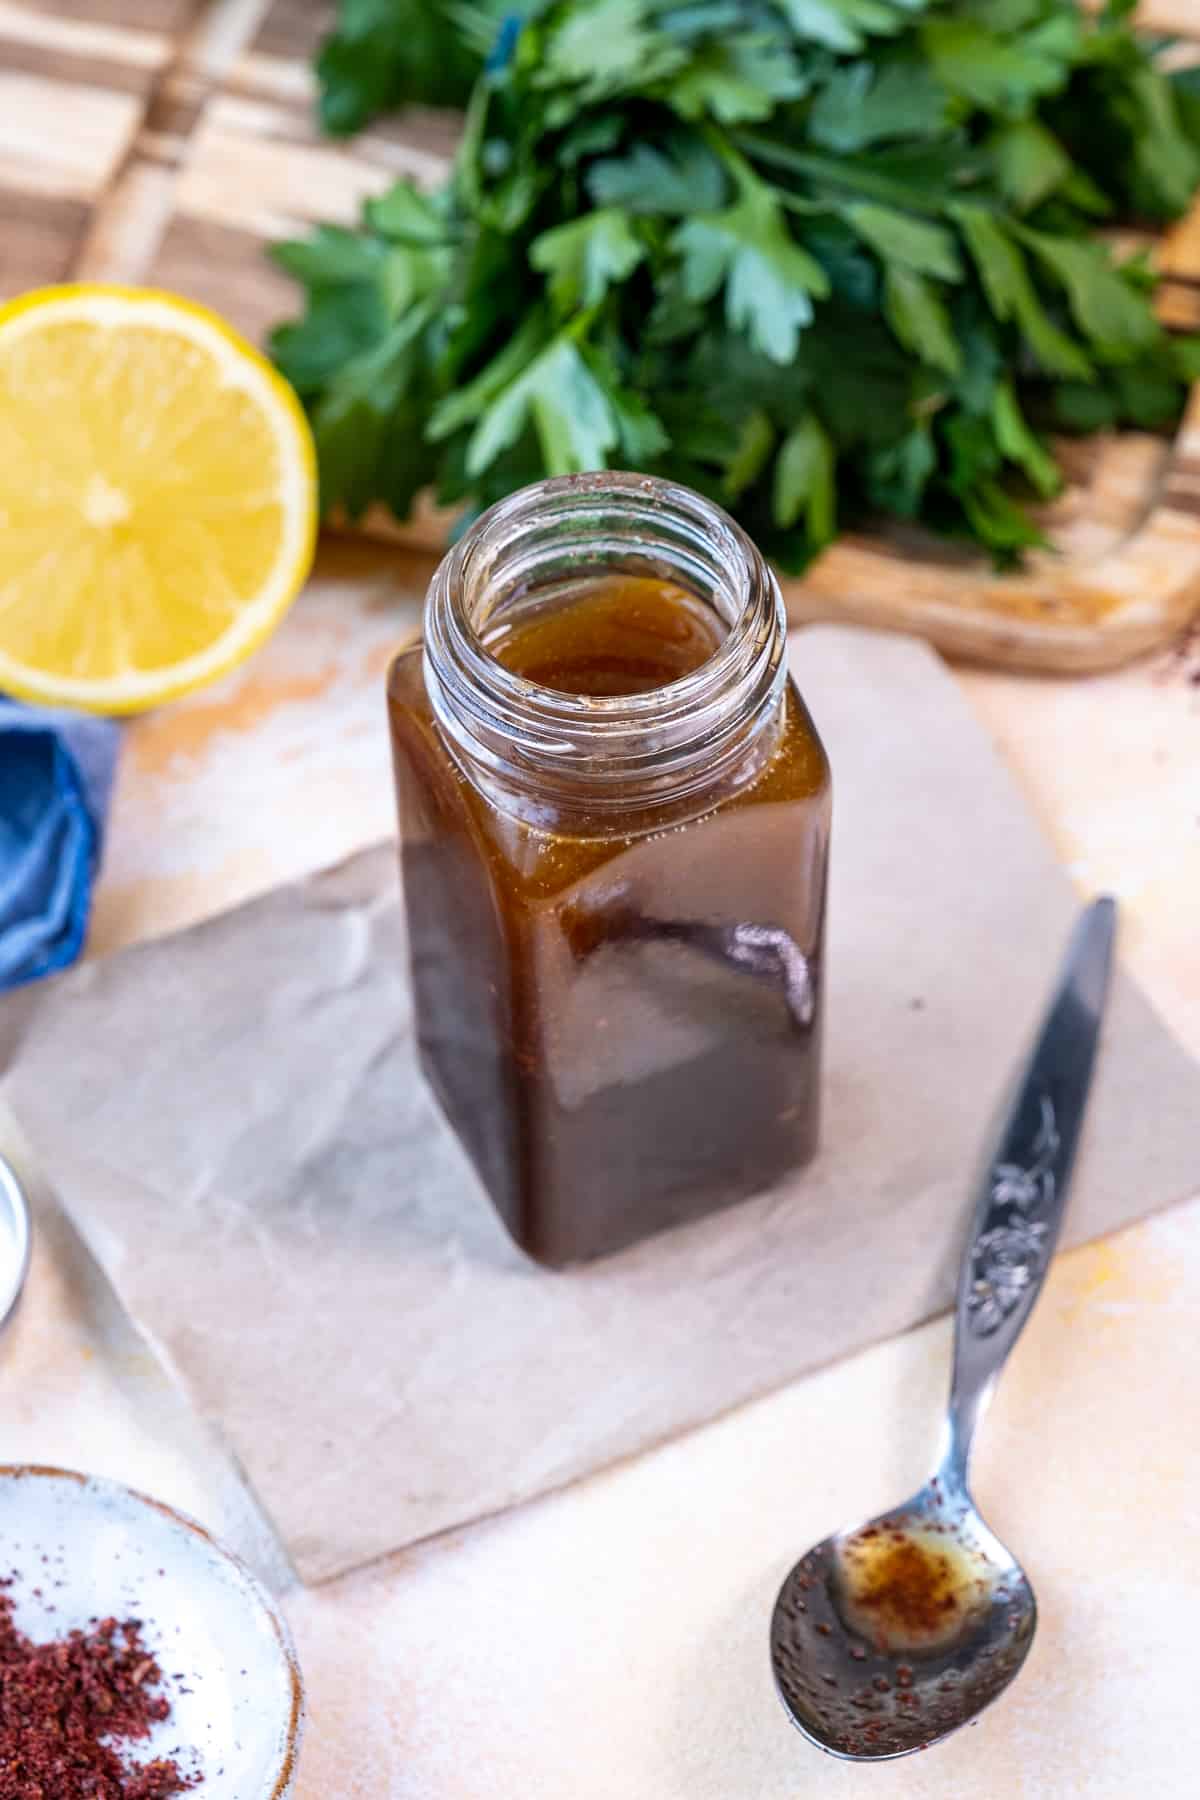 A small jar of salad dressing, a spoon, half lemon and parsley on the side.